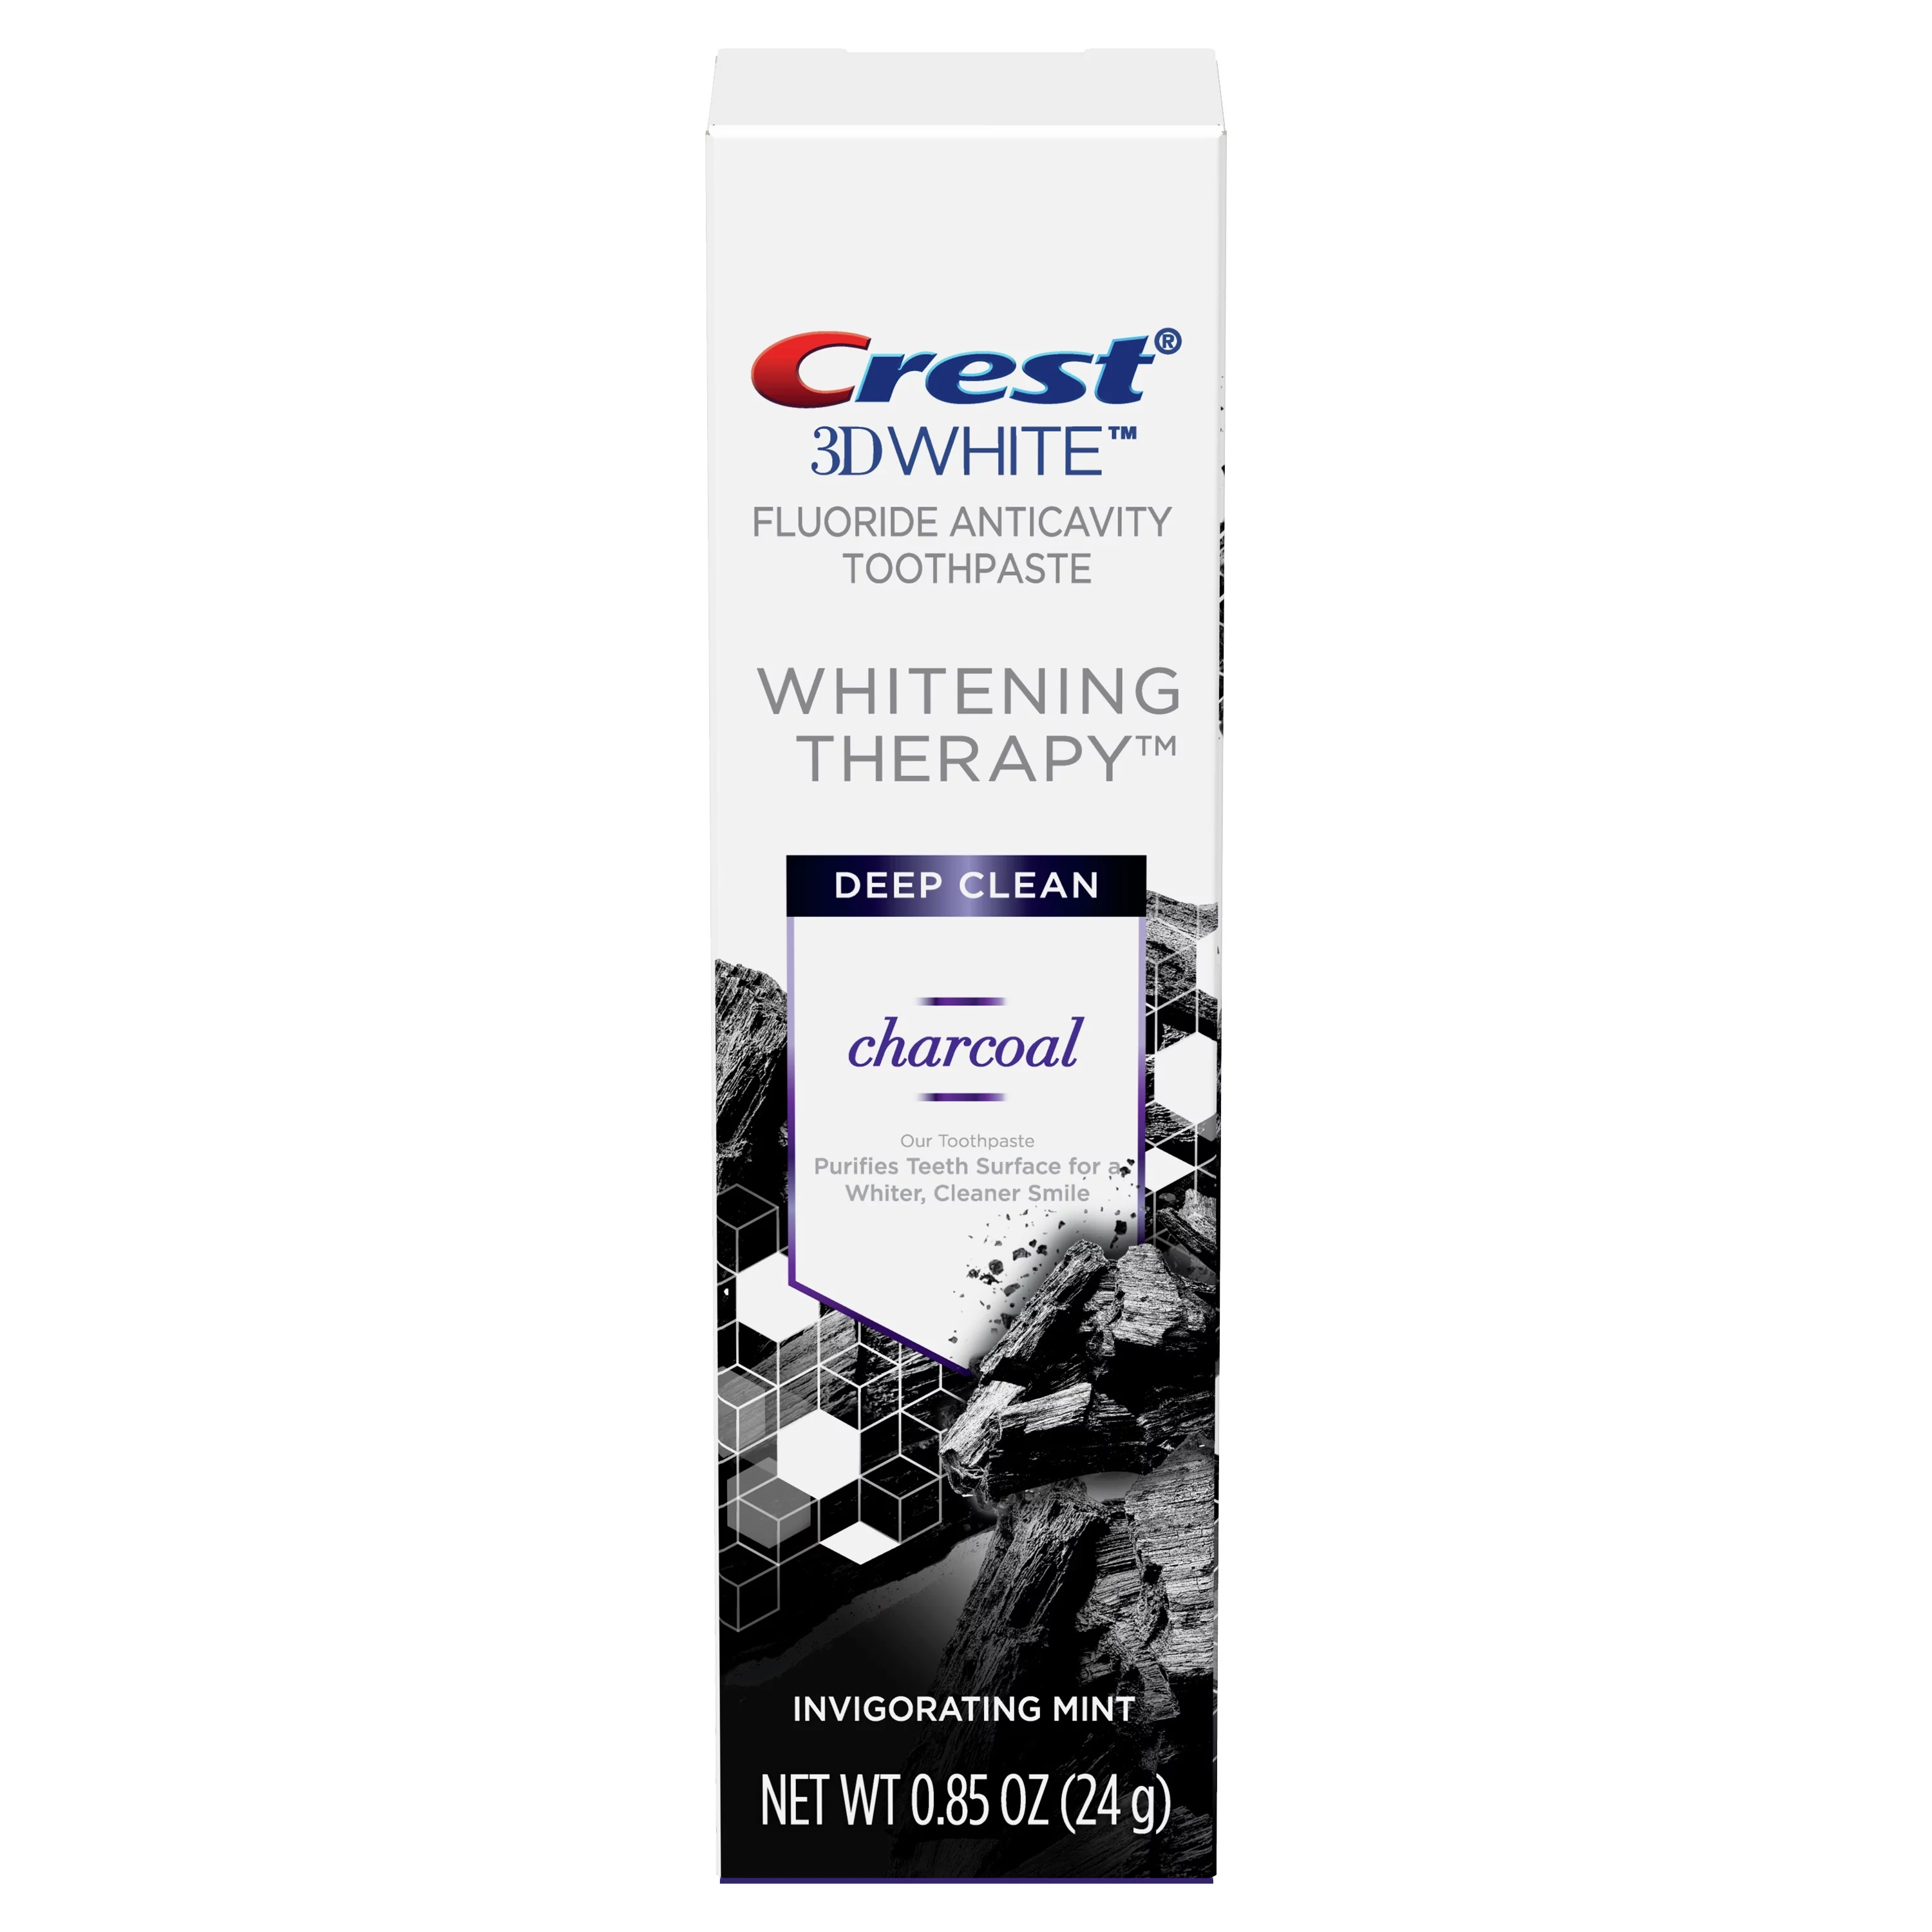 Crest 3D White Whitening Therapy Charcoal Deep Clean Fluoride Toothpaste, Invigorating Mint, .85 oz